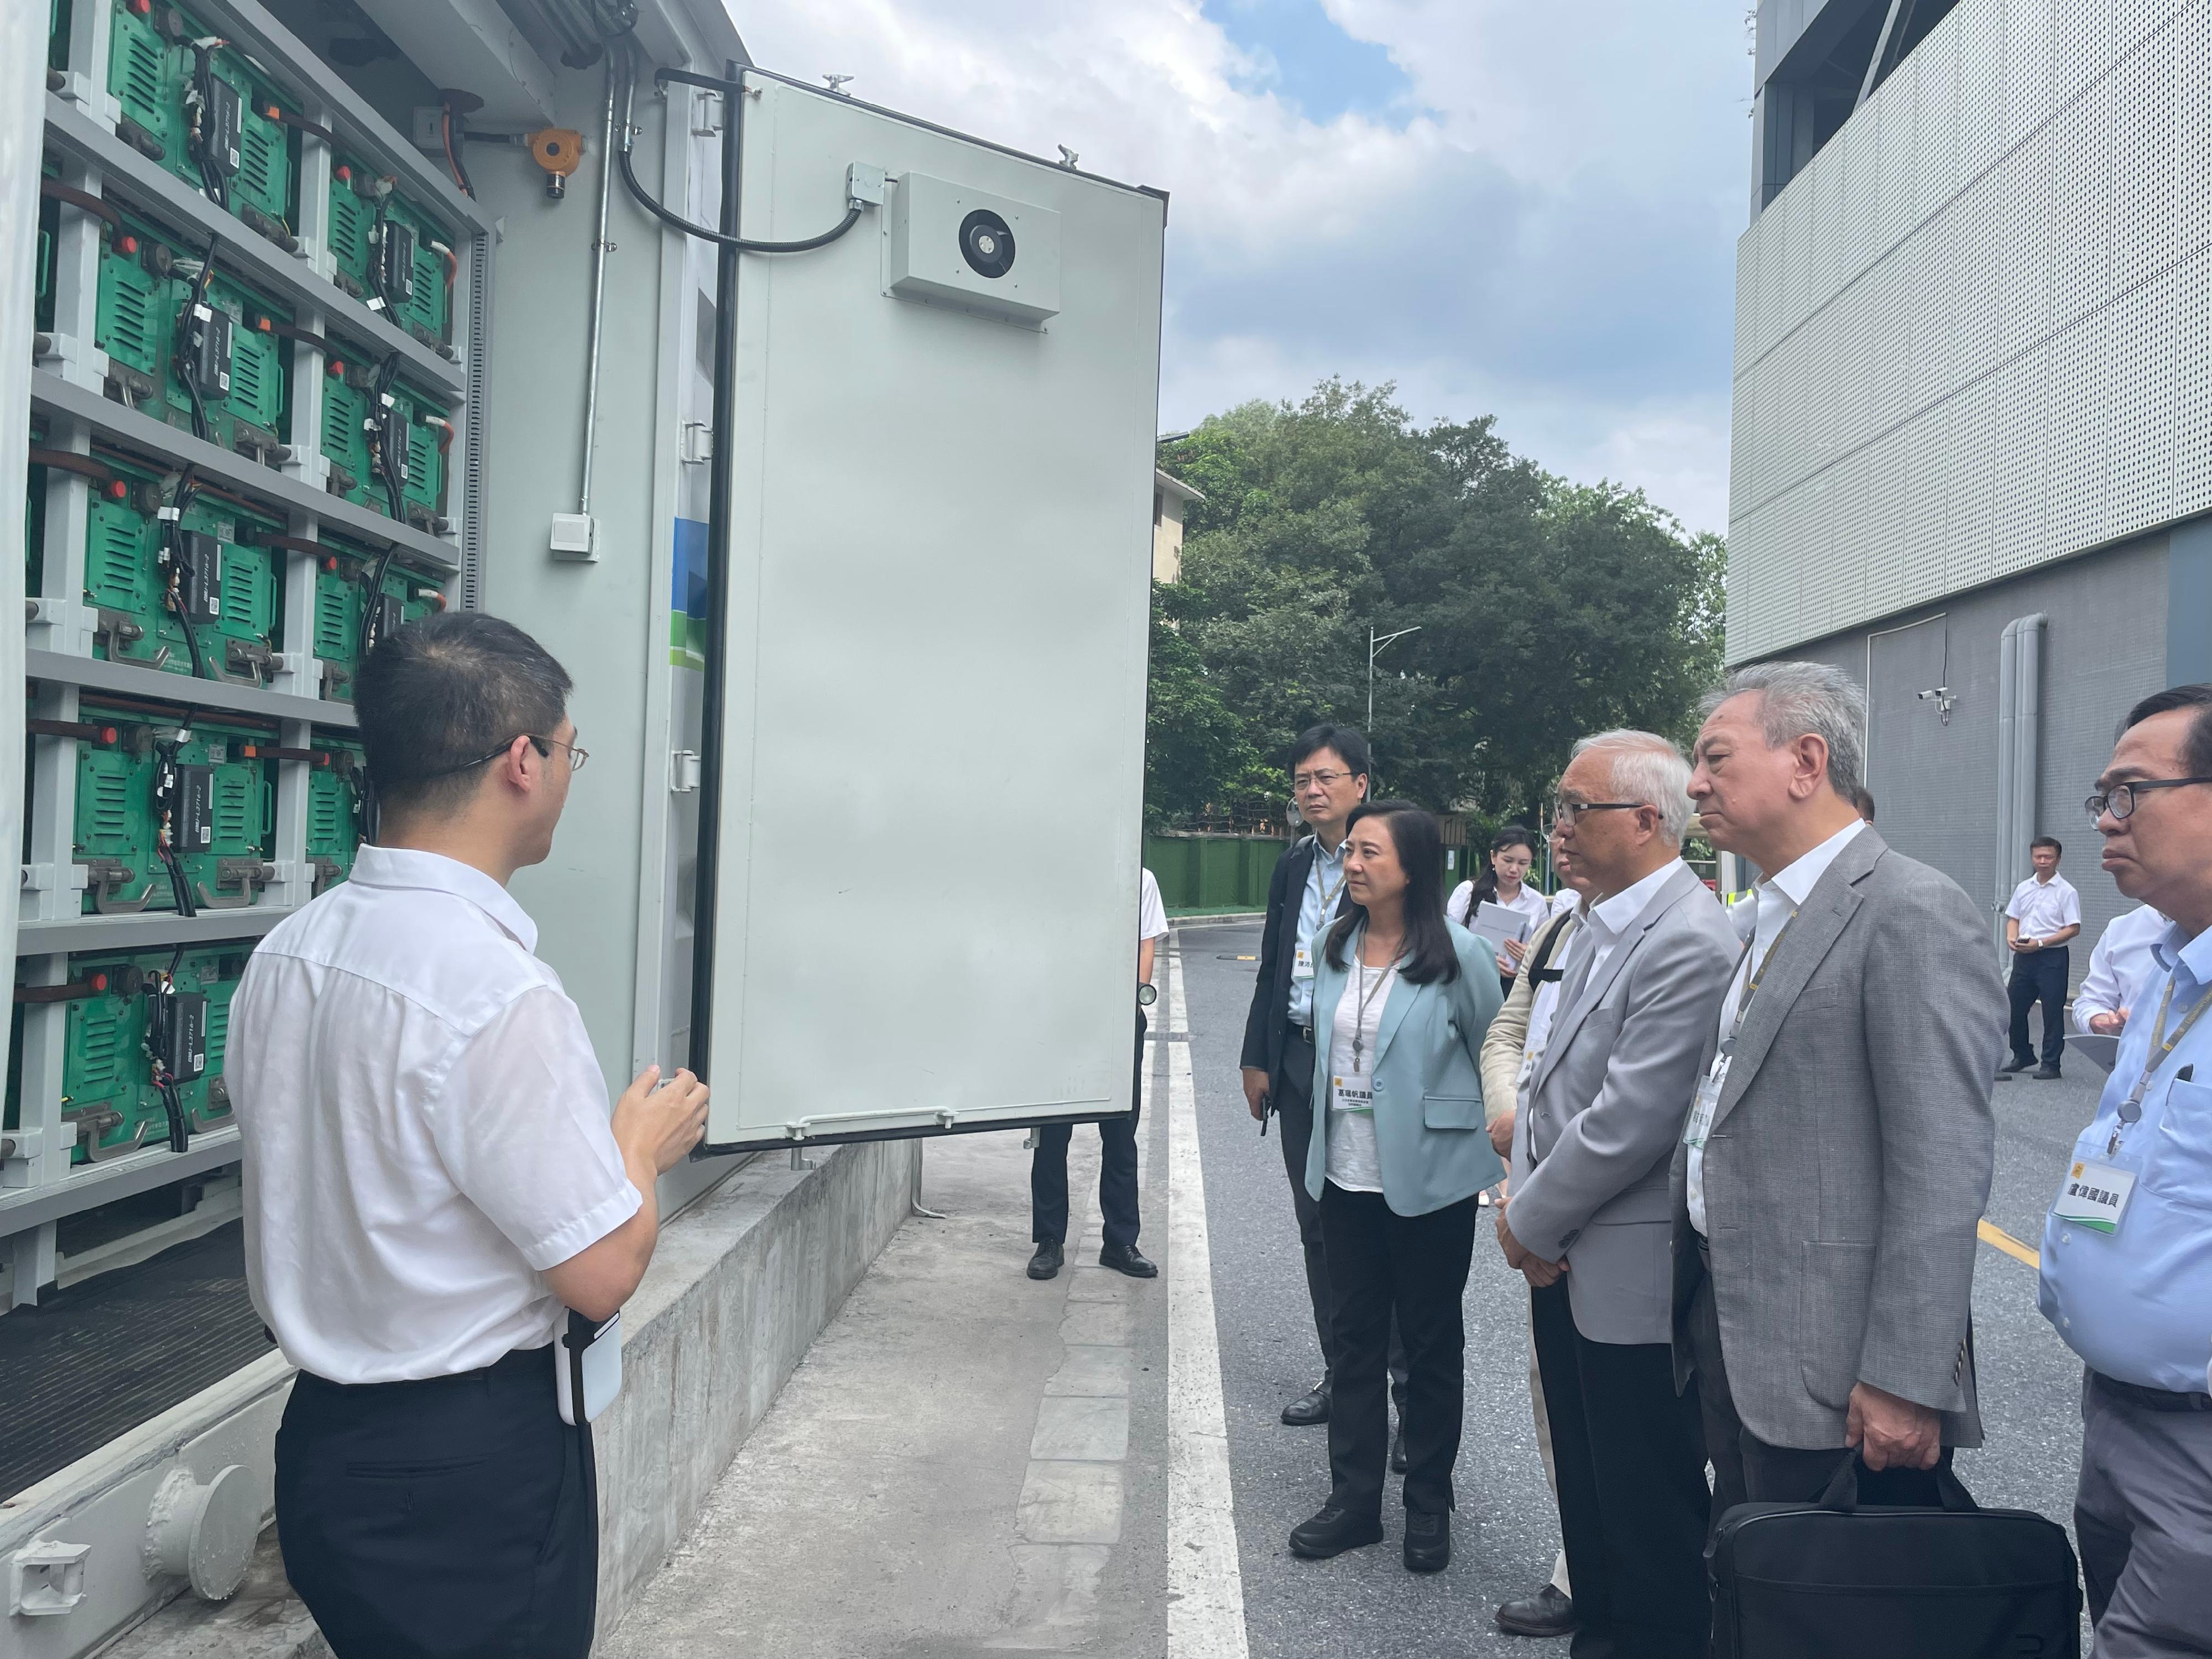 The Secretary for Environment and Ecology, Mr Tse Chin-wan, together with the Legislative Council Panel on Environmental Affairs, today (August 7) visited the Yanling new energy eco-industrial park and Guangzhou public transport command center of the Guangzhou Public Transport Group in the afternoon. Photo shows Mr Tse (third right), and the delegation of the Legislative Council Panel on Environmental Affairs, receiving a briefing from a representative on their battery energy storage system. 